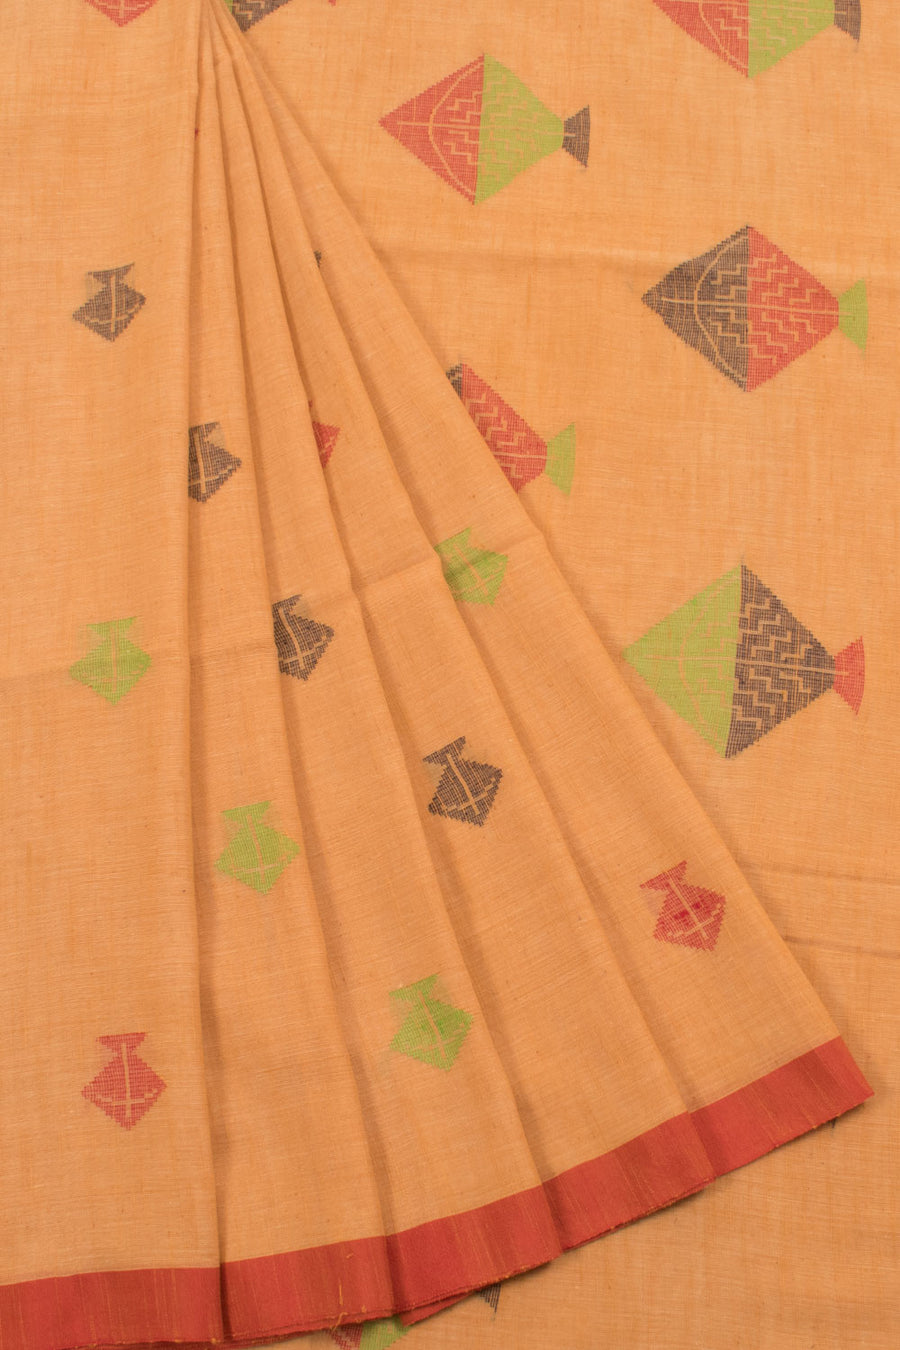 Handloom Bengal Cotton Saree with All Over Kite Motifs